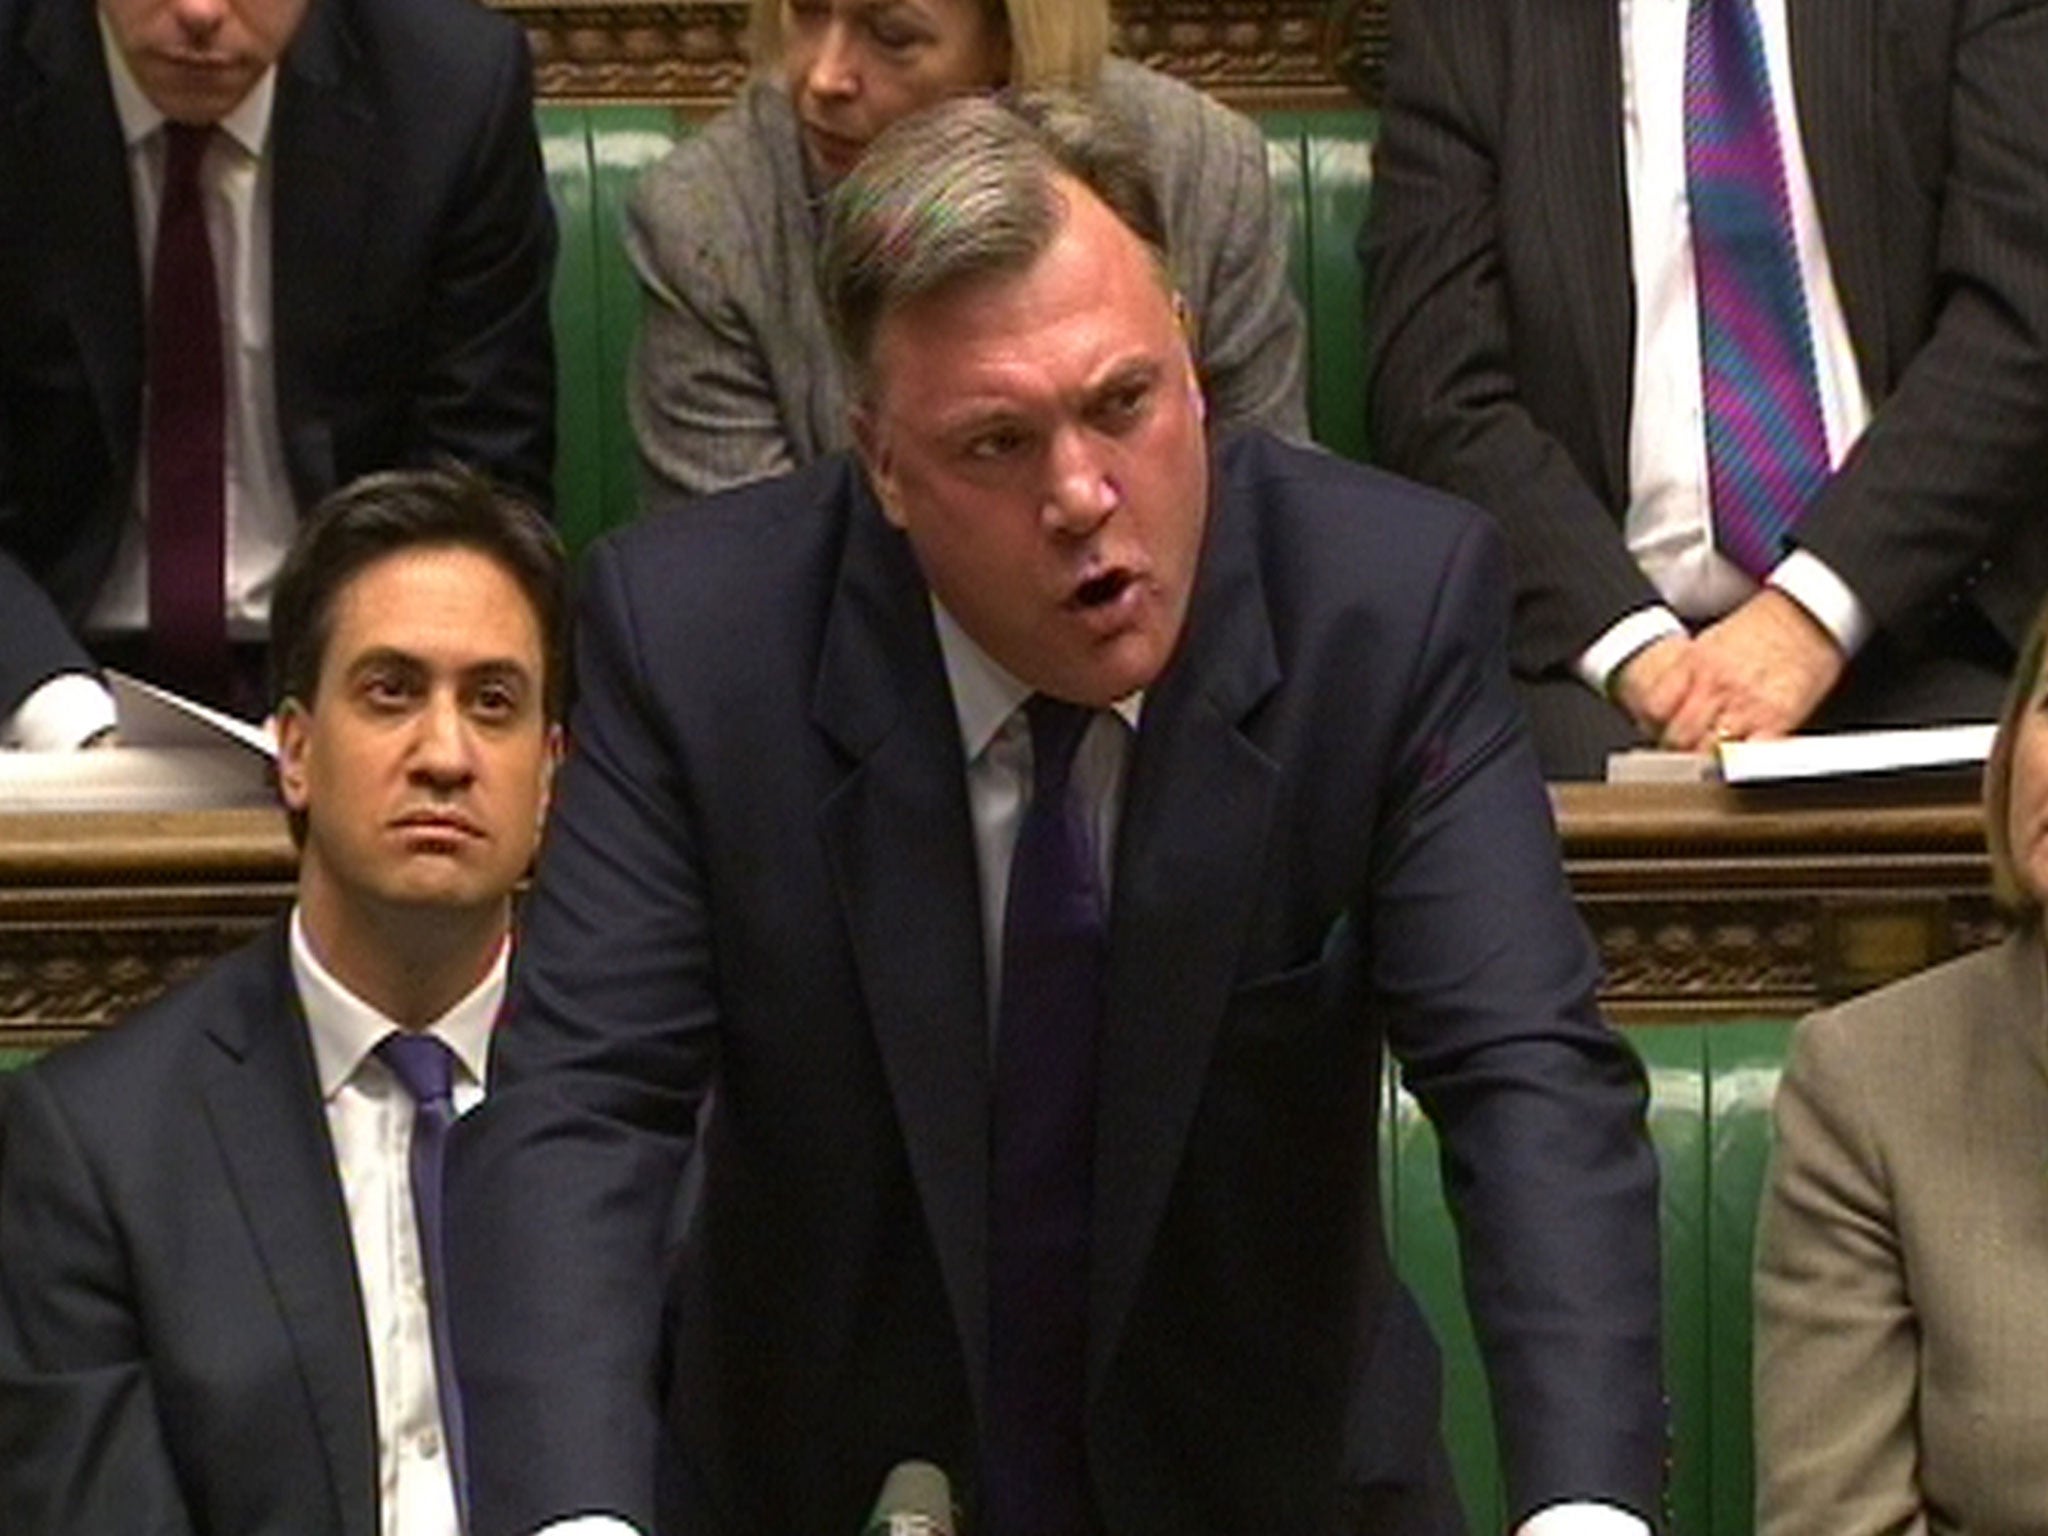 Mr Balls says he and Ed Miliband barely spoke during the 2015 election campaign